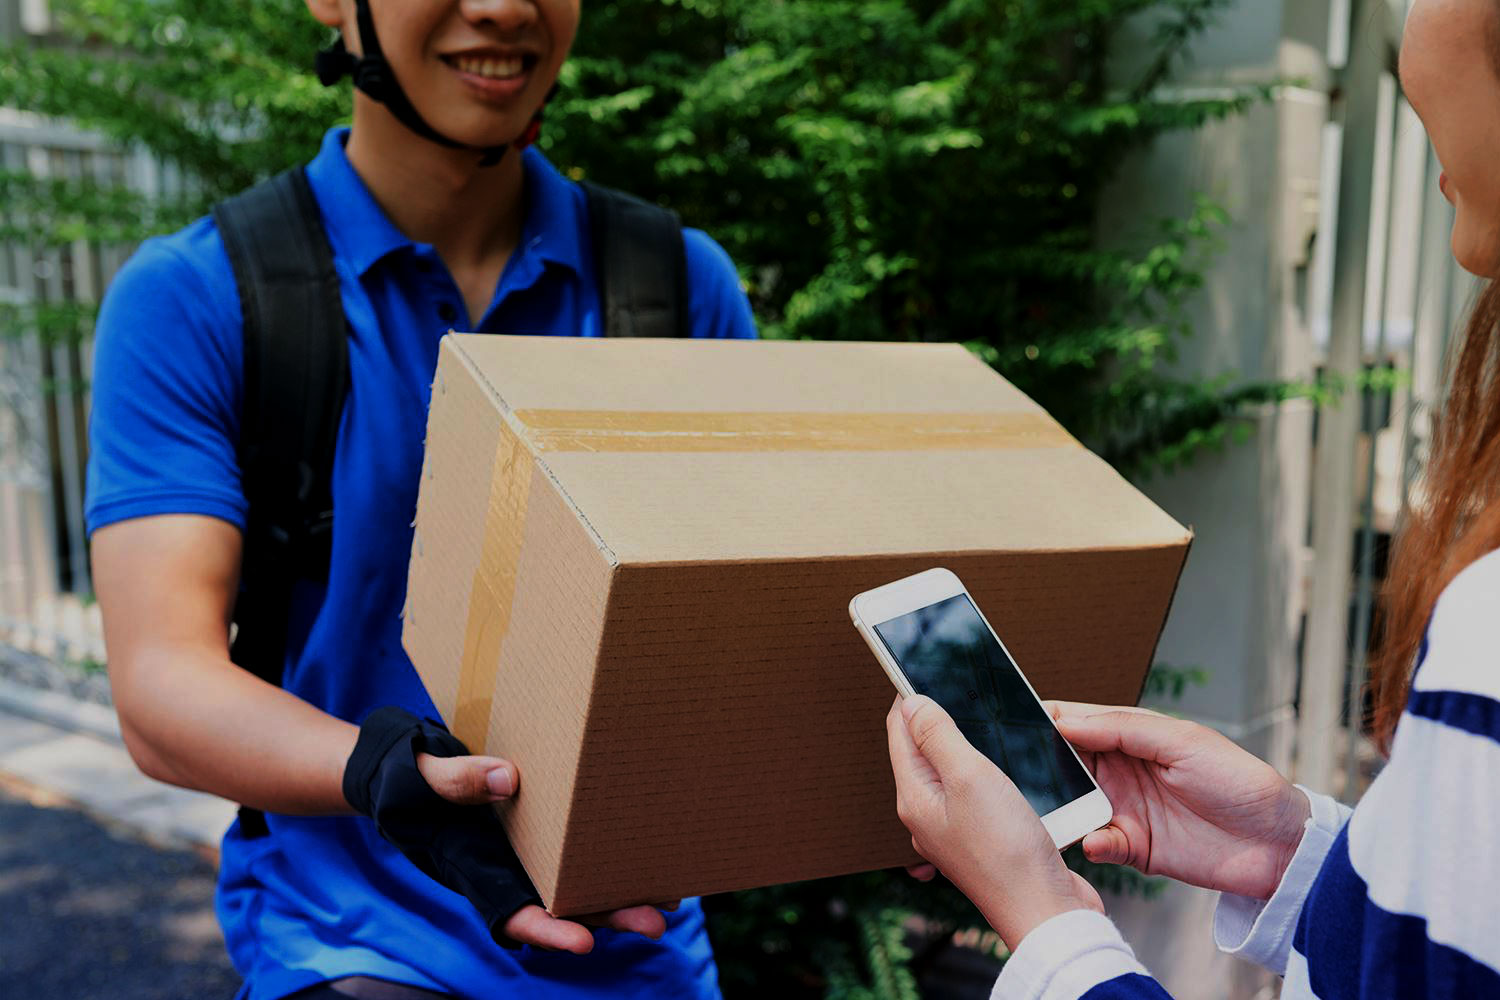 Consumers prefer retailers offering a range of delivery options